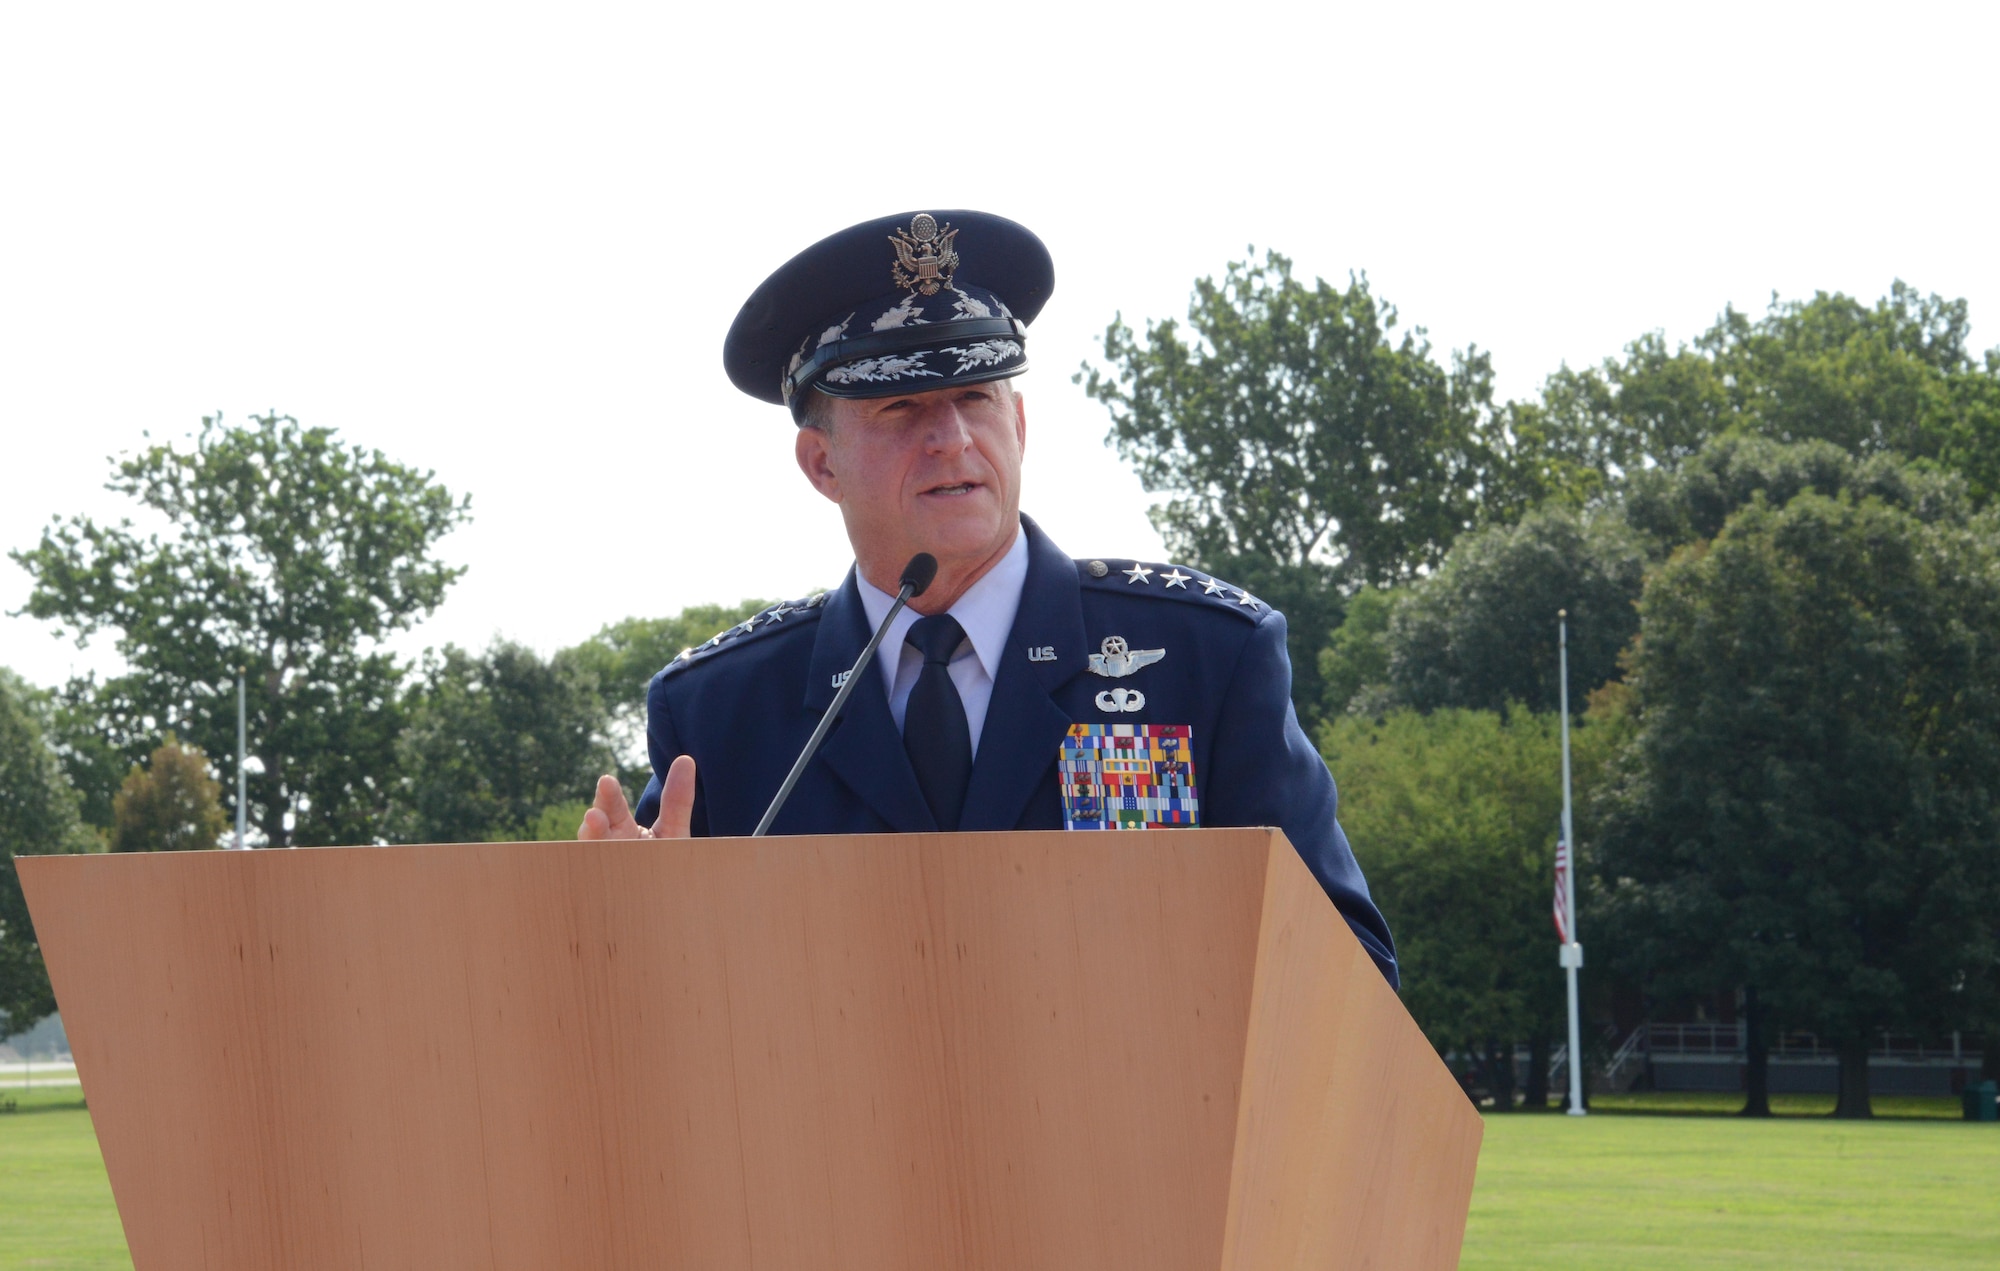 Air Force Chief of Staff Gen. David L. Goldfein provides remarks during the promotion ceremony of Gen. Stephen W. Wilson, the U.S. Strategic Command deputy commander, at Offutt Air Force Base, Neb., July 22, 2016. Goldfein, who presided over the ceremony, said that Wilson had the competence and character required to be promoted to the rank of general and hold the position of 39th vice chief of staff of the Air Force. (U.S. Air Force photo/Master Sgt. April Wickes)